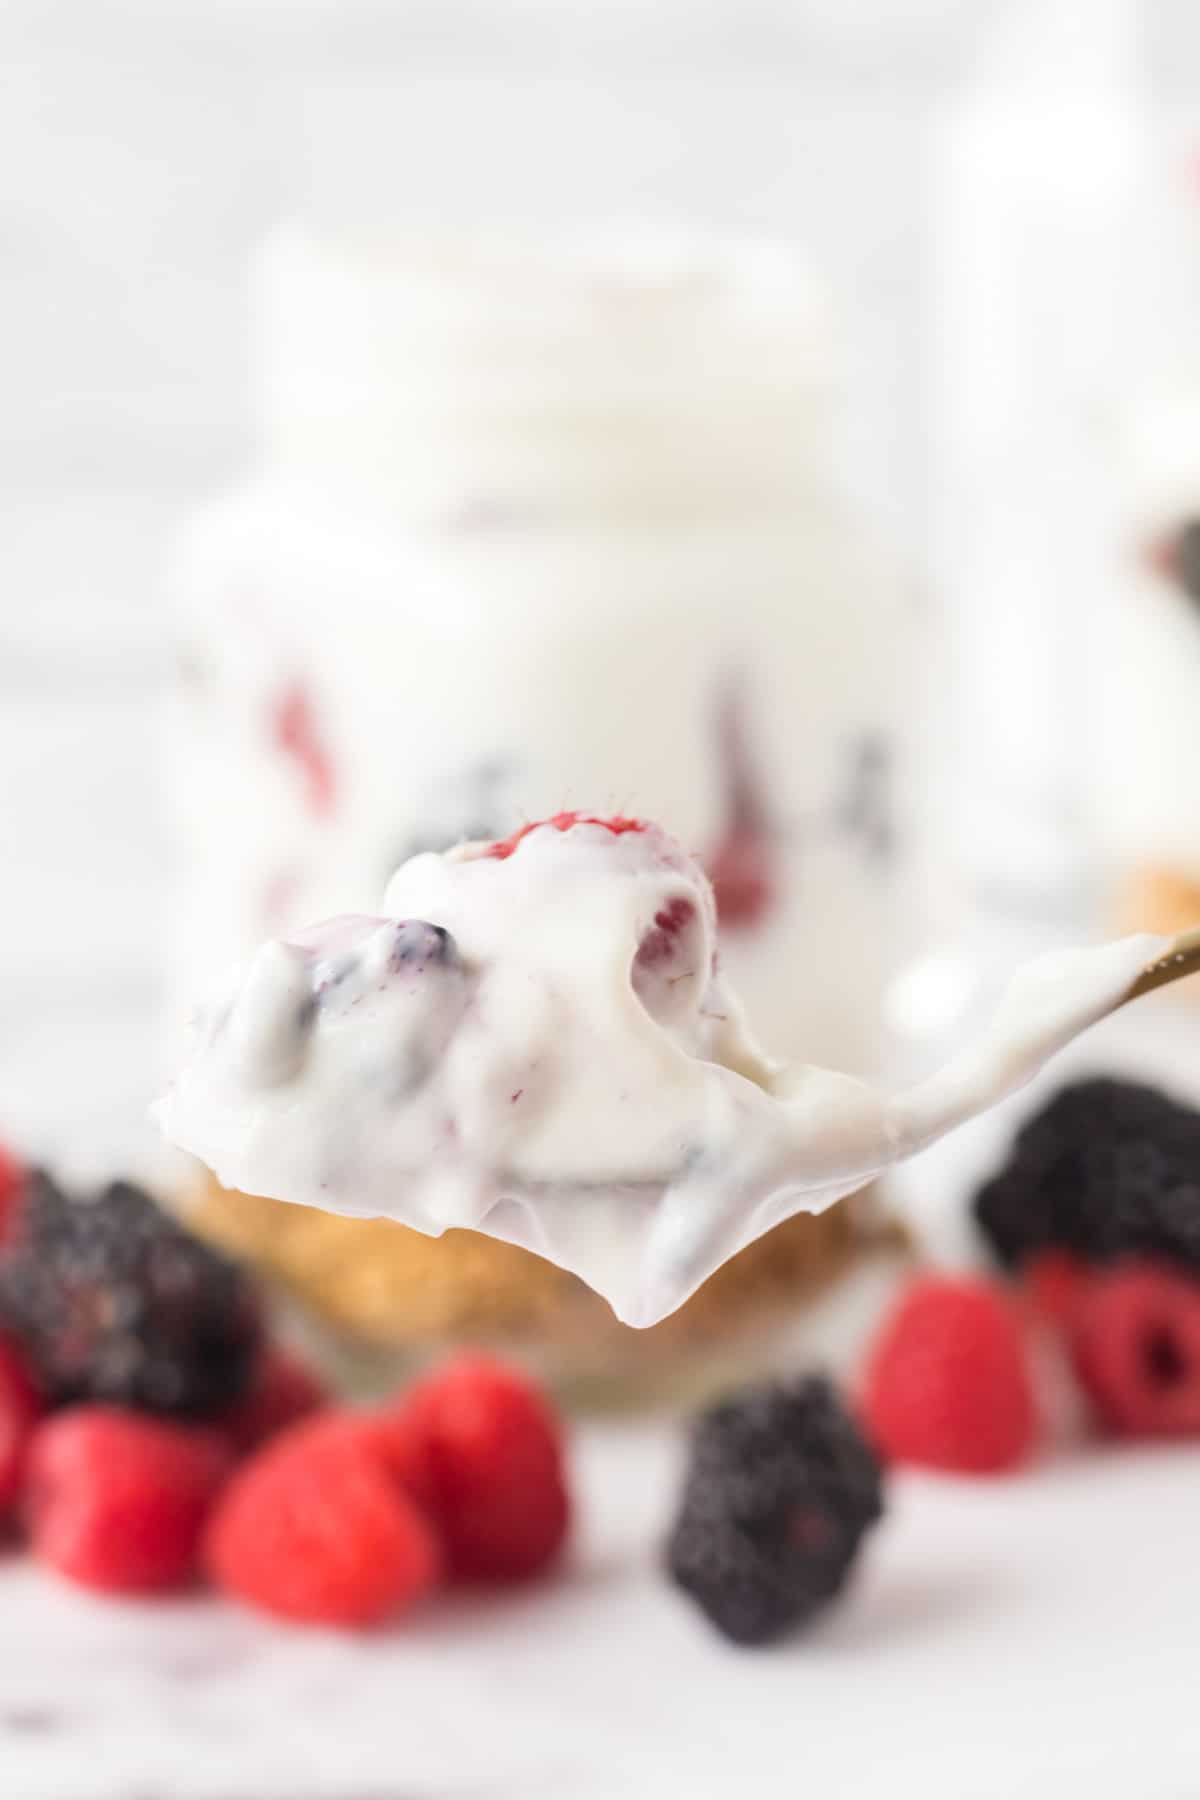 A spoonful with yogurt and berries ready for a bite to be taken.